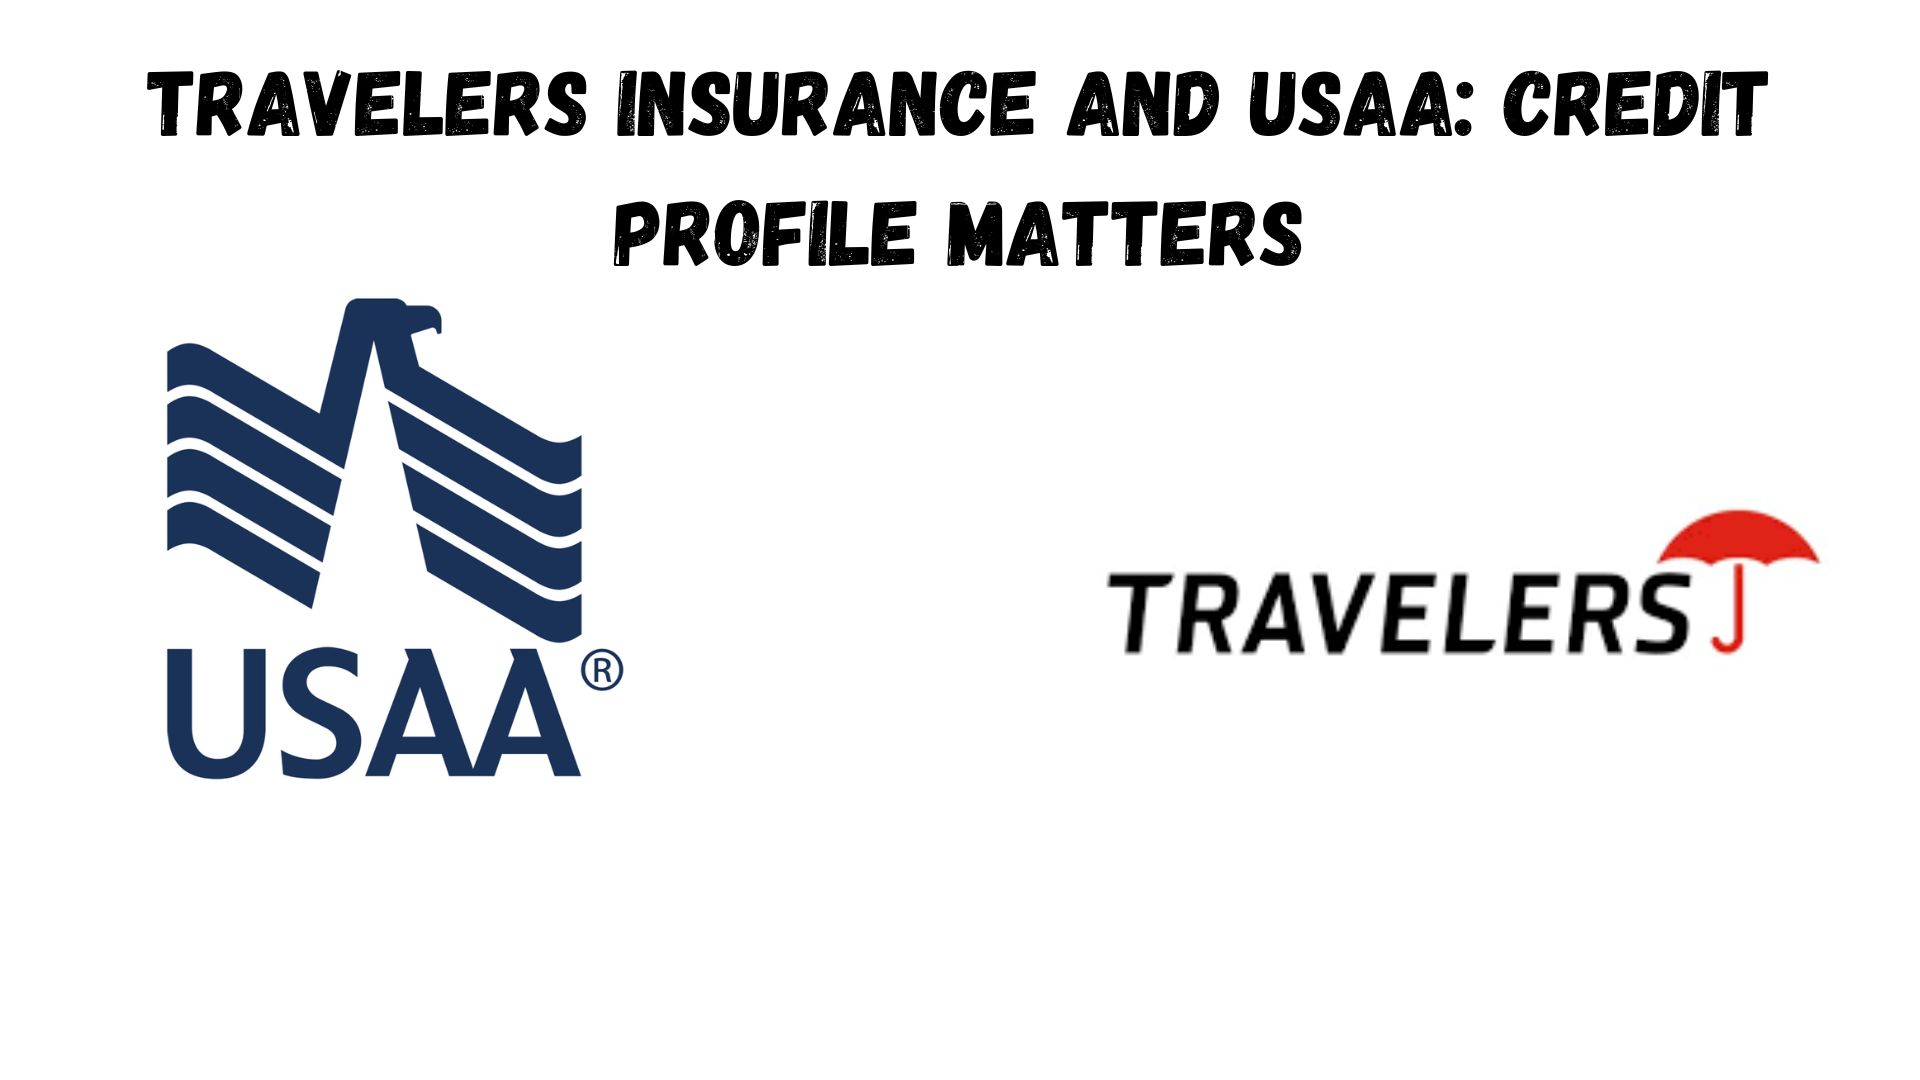 Travelers Insurance and USAA Credit Profile Matters.